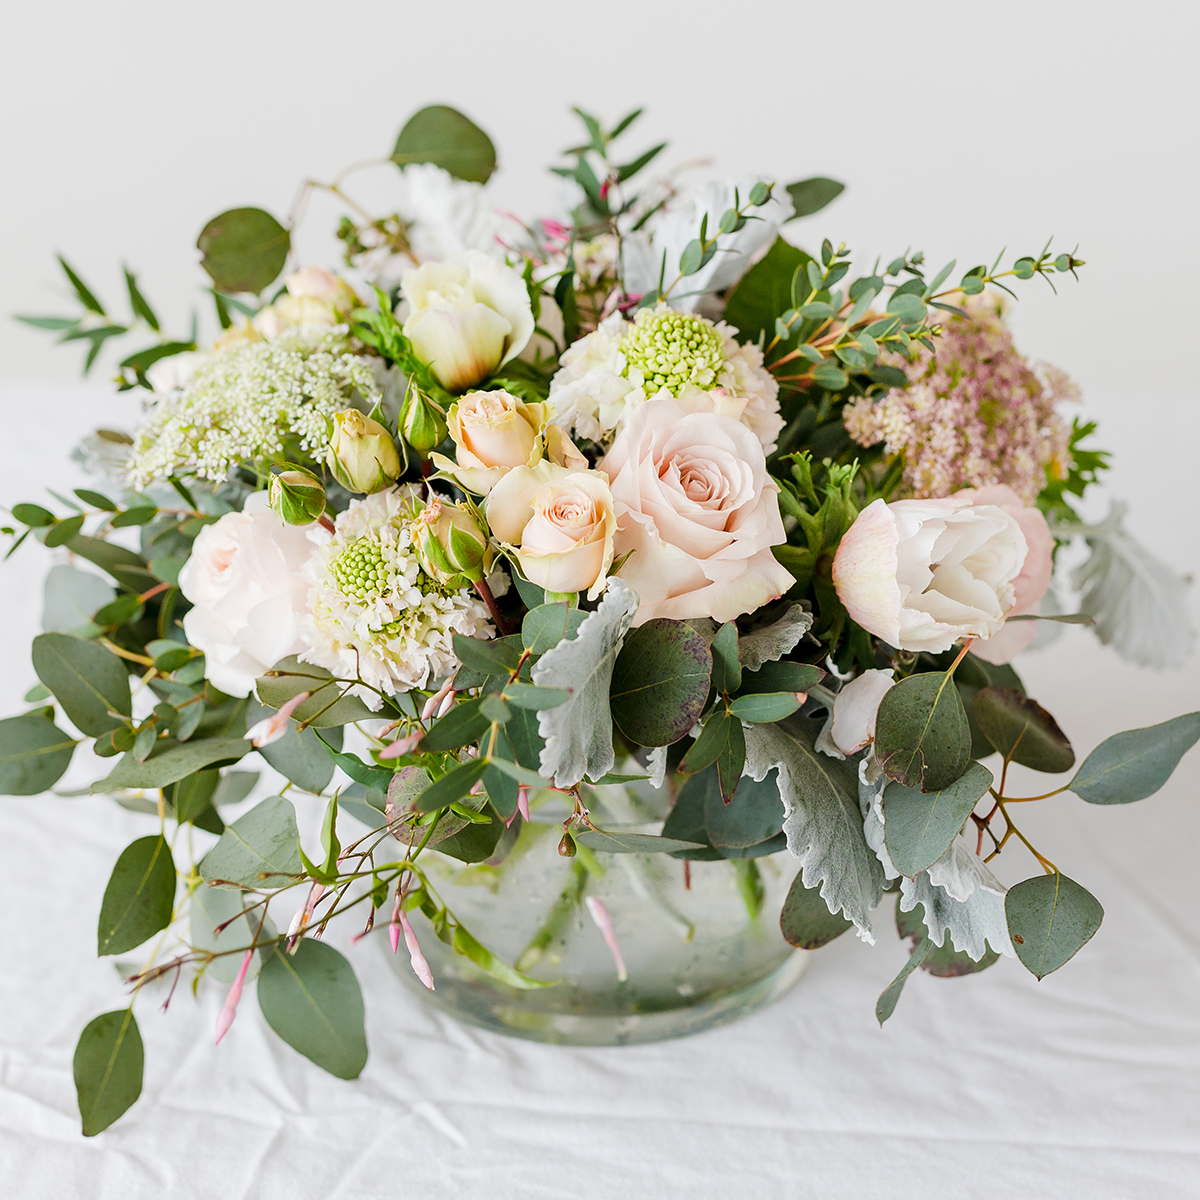 blush and white flowers and greenery in a glass bowl